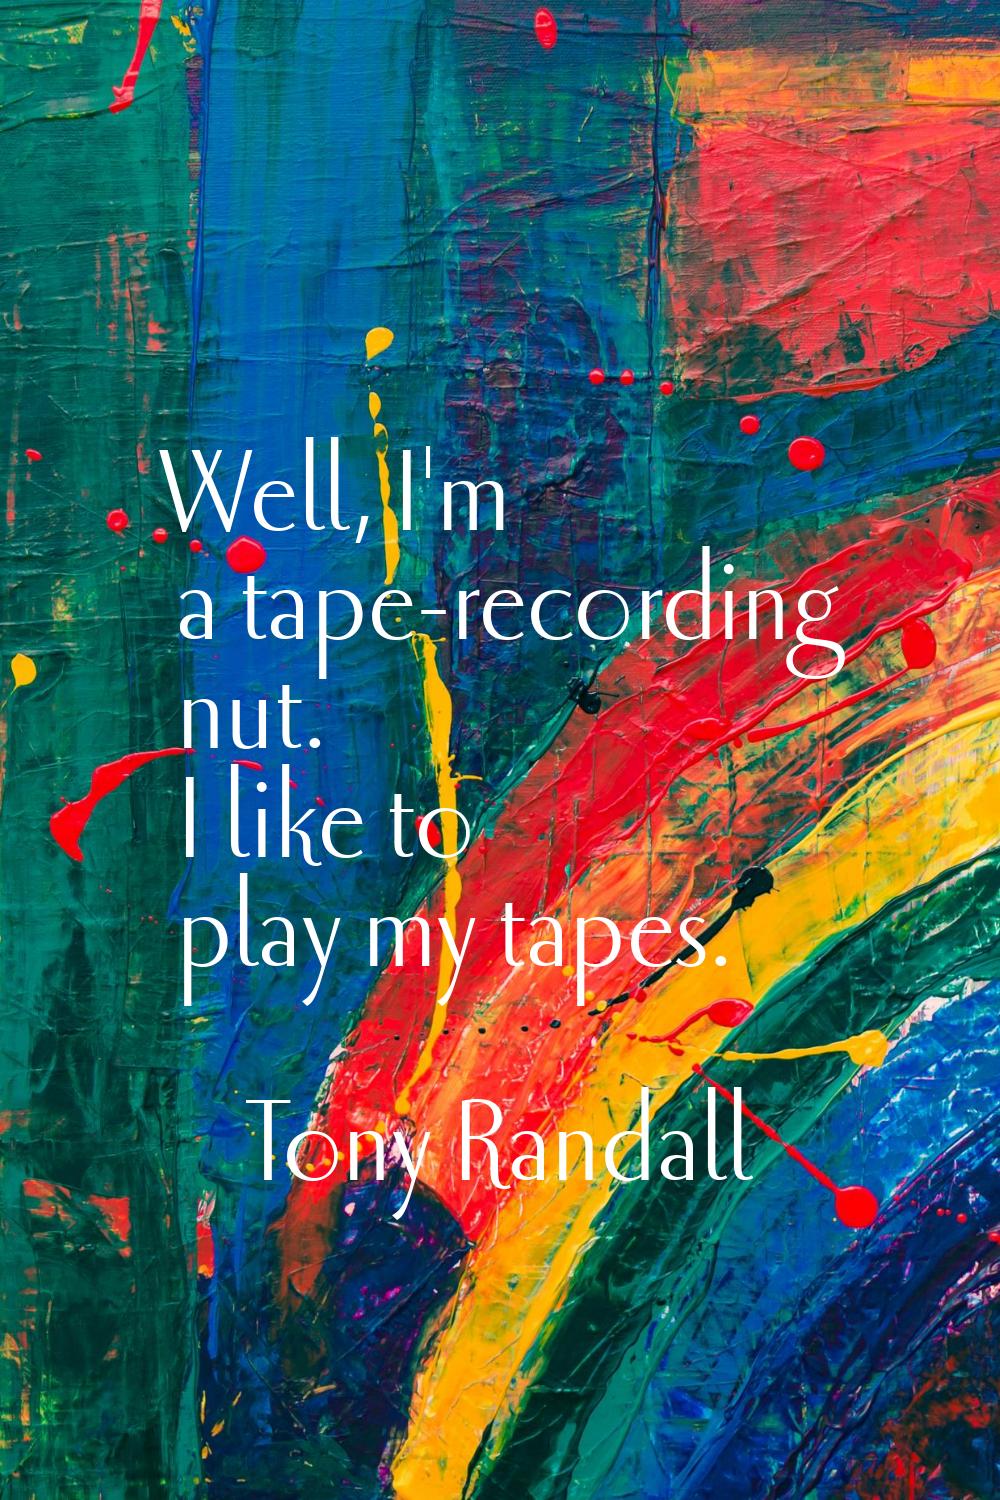 Well, I'm a tape-recording nut. I like to play my tapes.